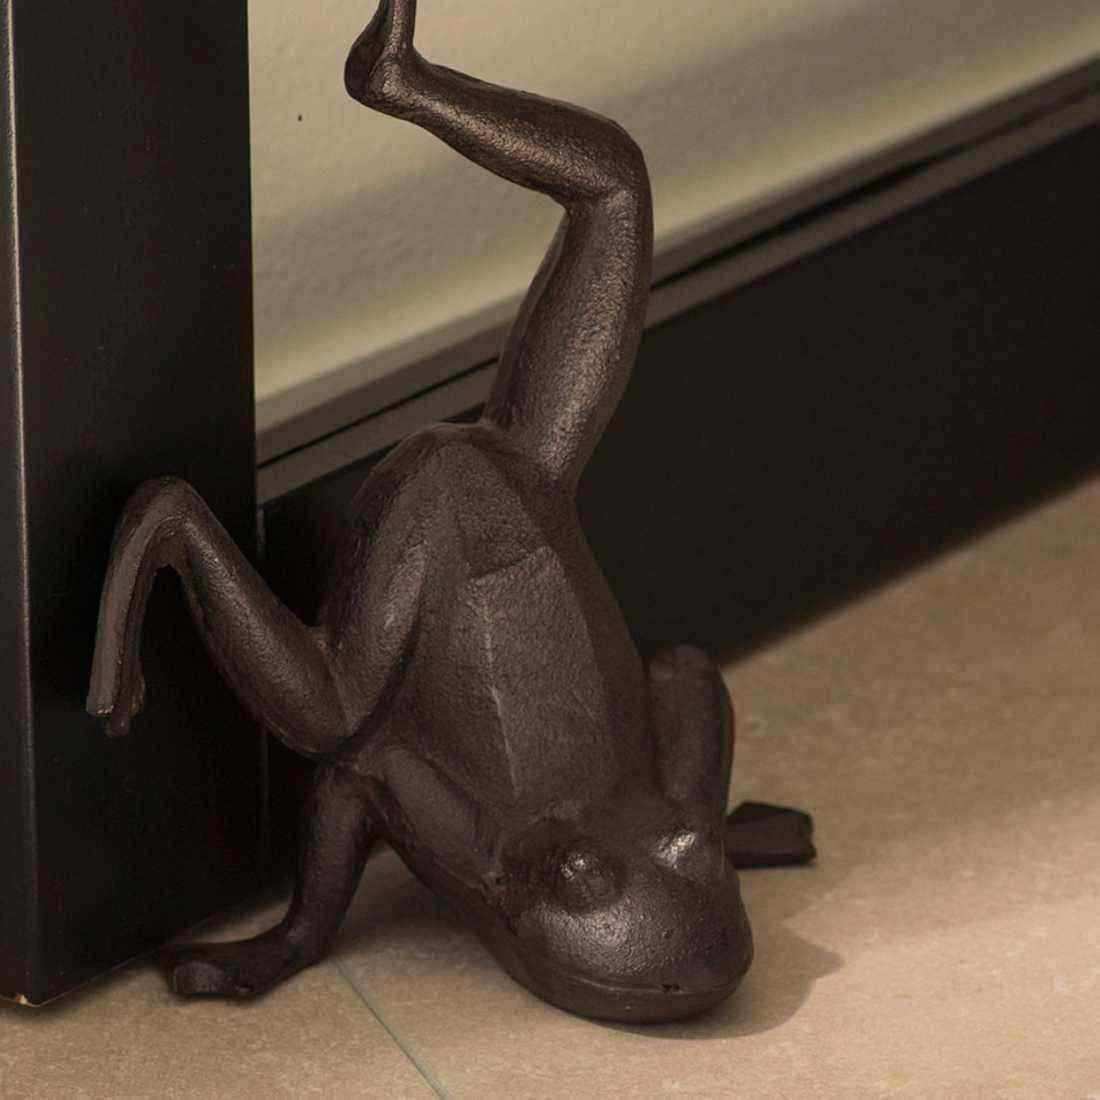 Cast Iron Leaping Frog Doorstop - The Farthing